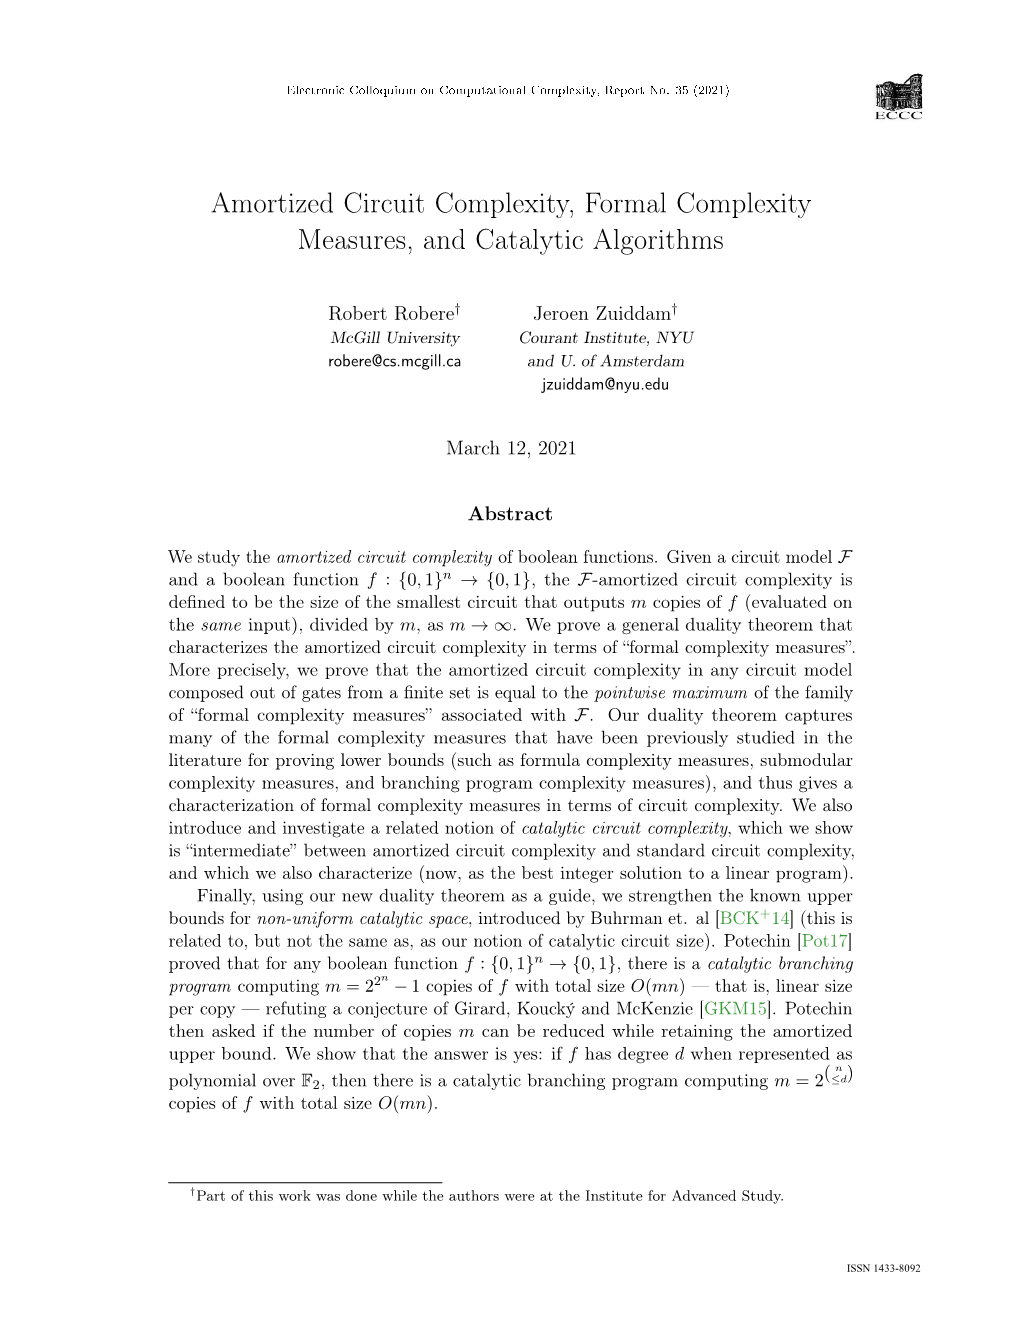 Amortized Circuit Complexity, Formal Complexity Measures, and Catalytic Algorithms